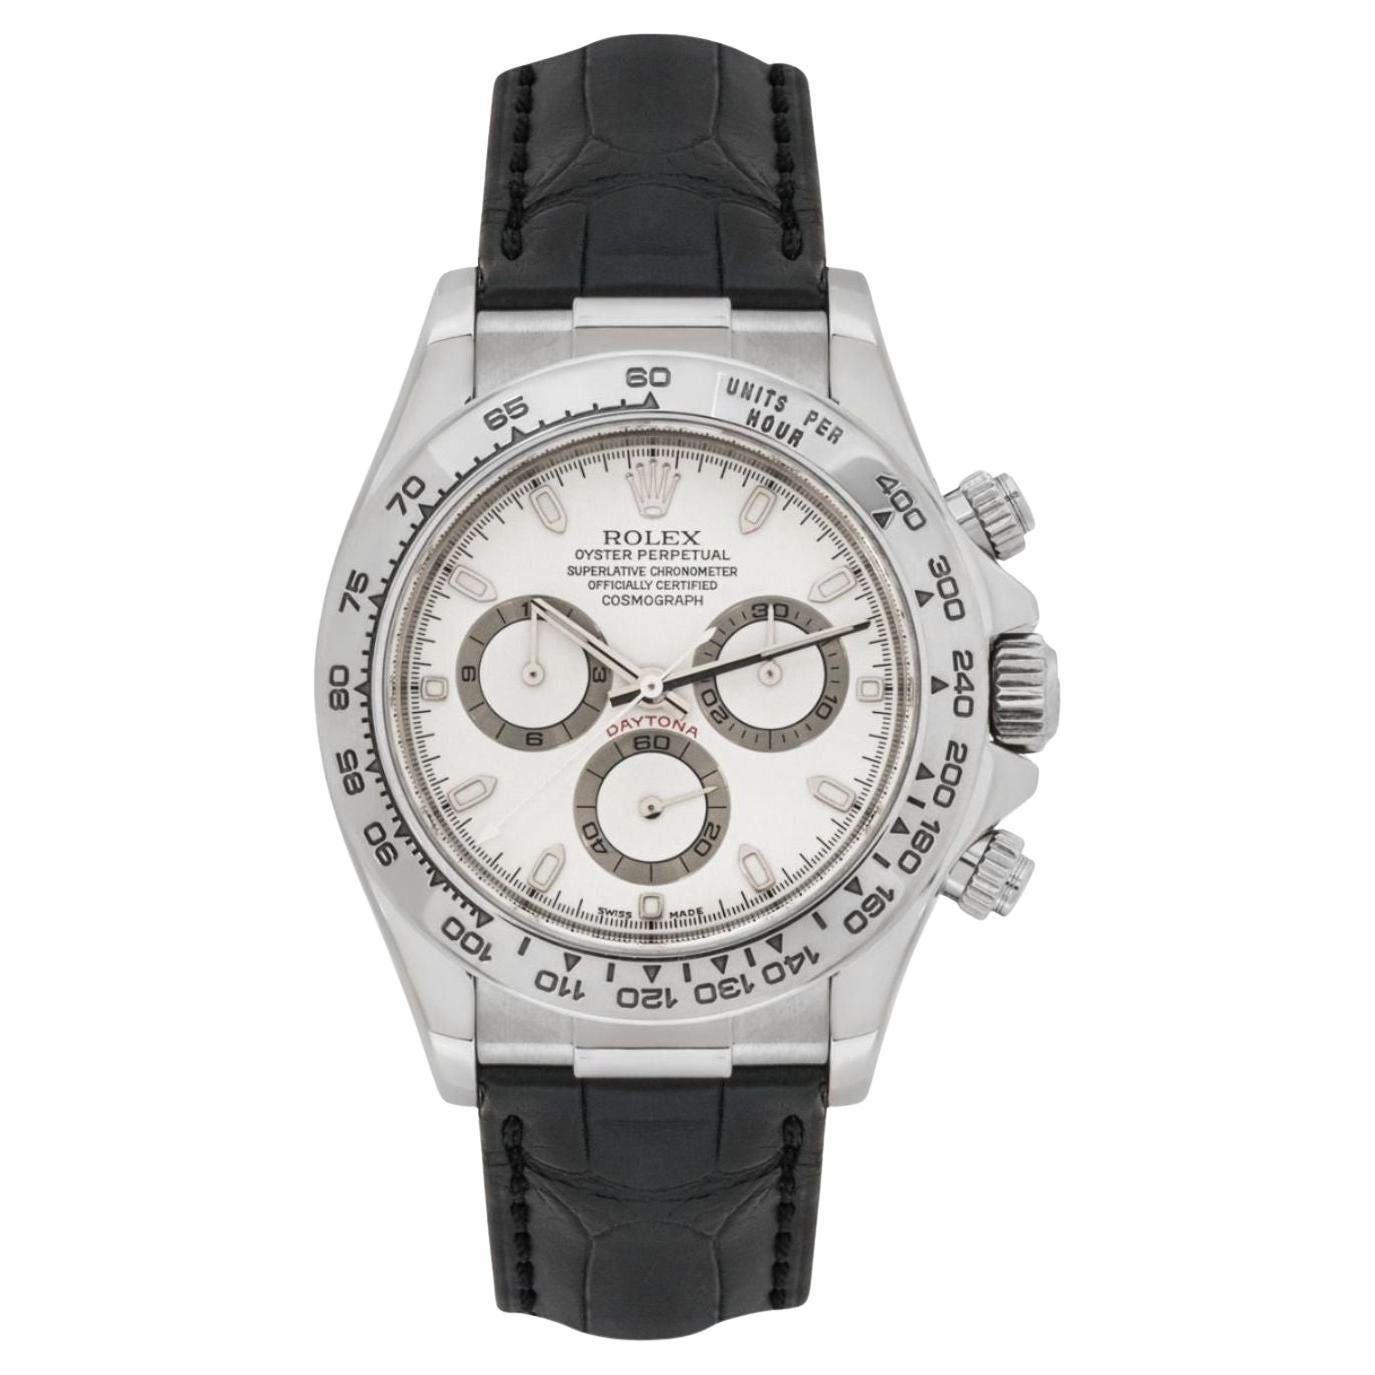 Rolex Daytona White Gold 116519 Watch For Sale at 1stDibs